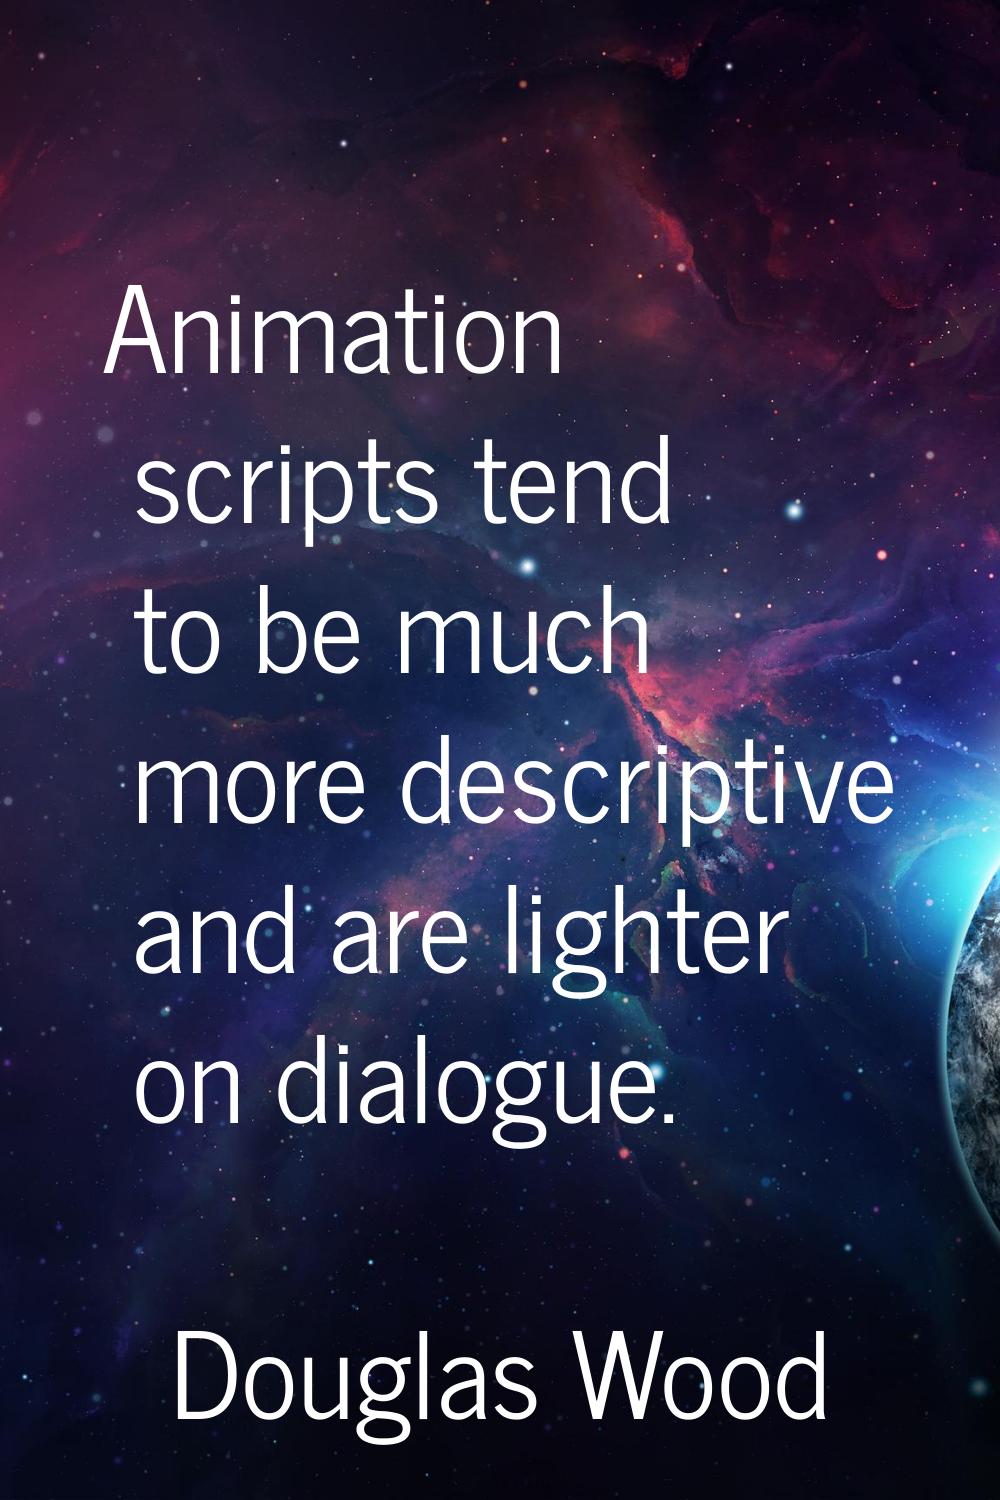 Animation scripts tend to be much more descriptive and are lighter on dialogue.